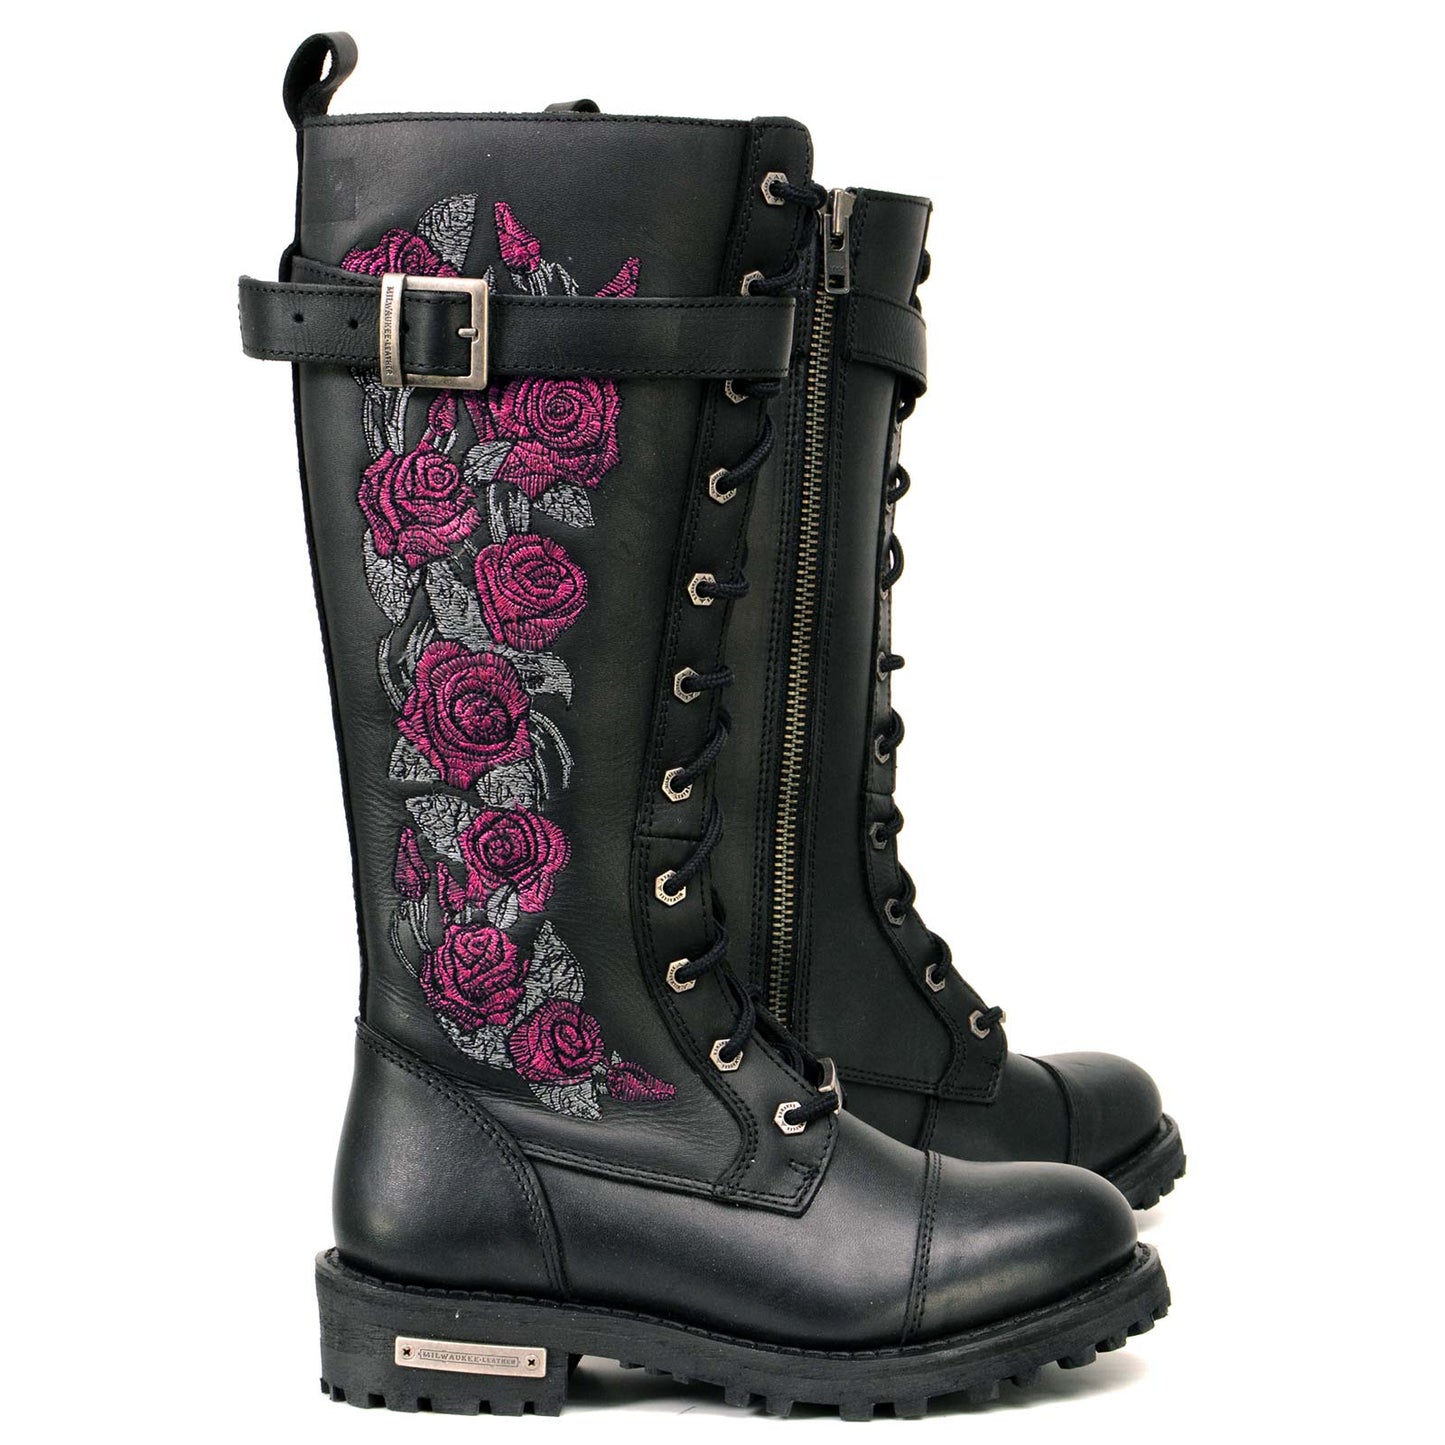 Milwaukee Leather MBL9356 Women's Black 14” Tall Motorcycle Boots Lace-Up High-Rise Pink Embroidered Leather Shoe